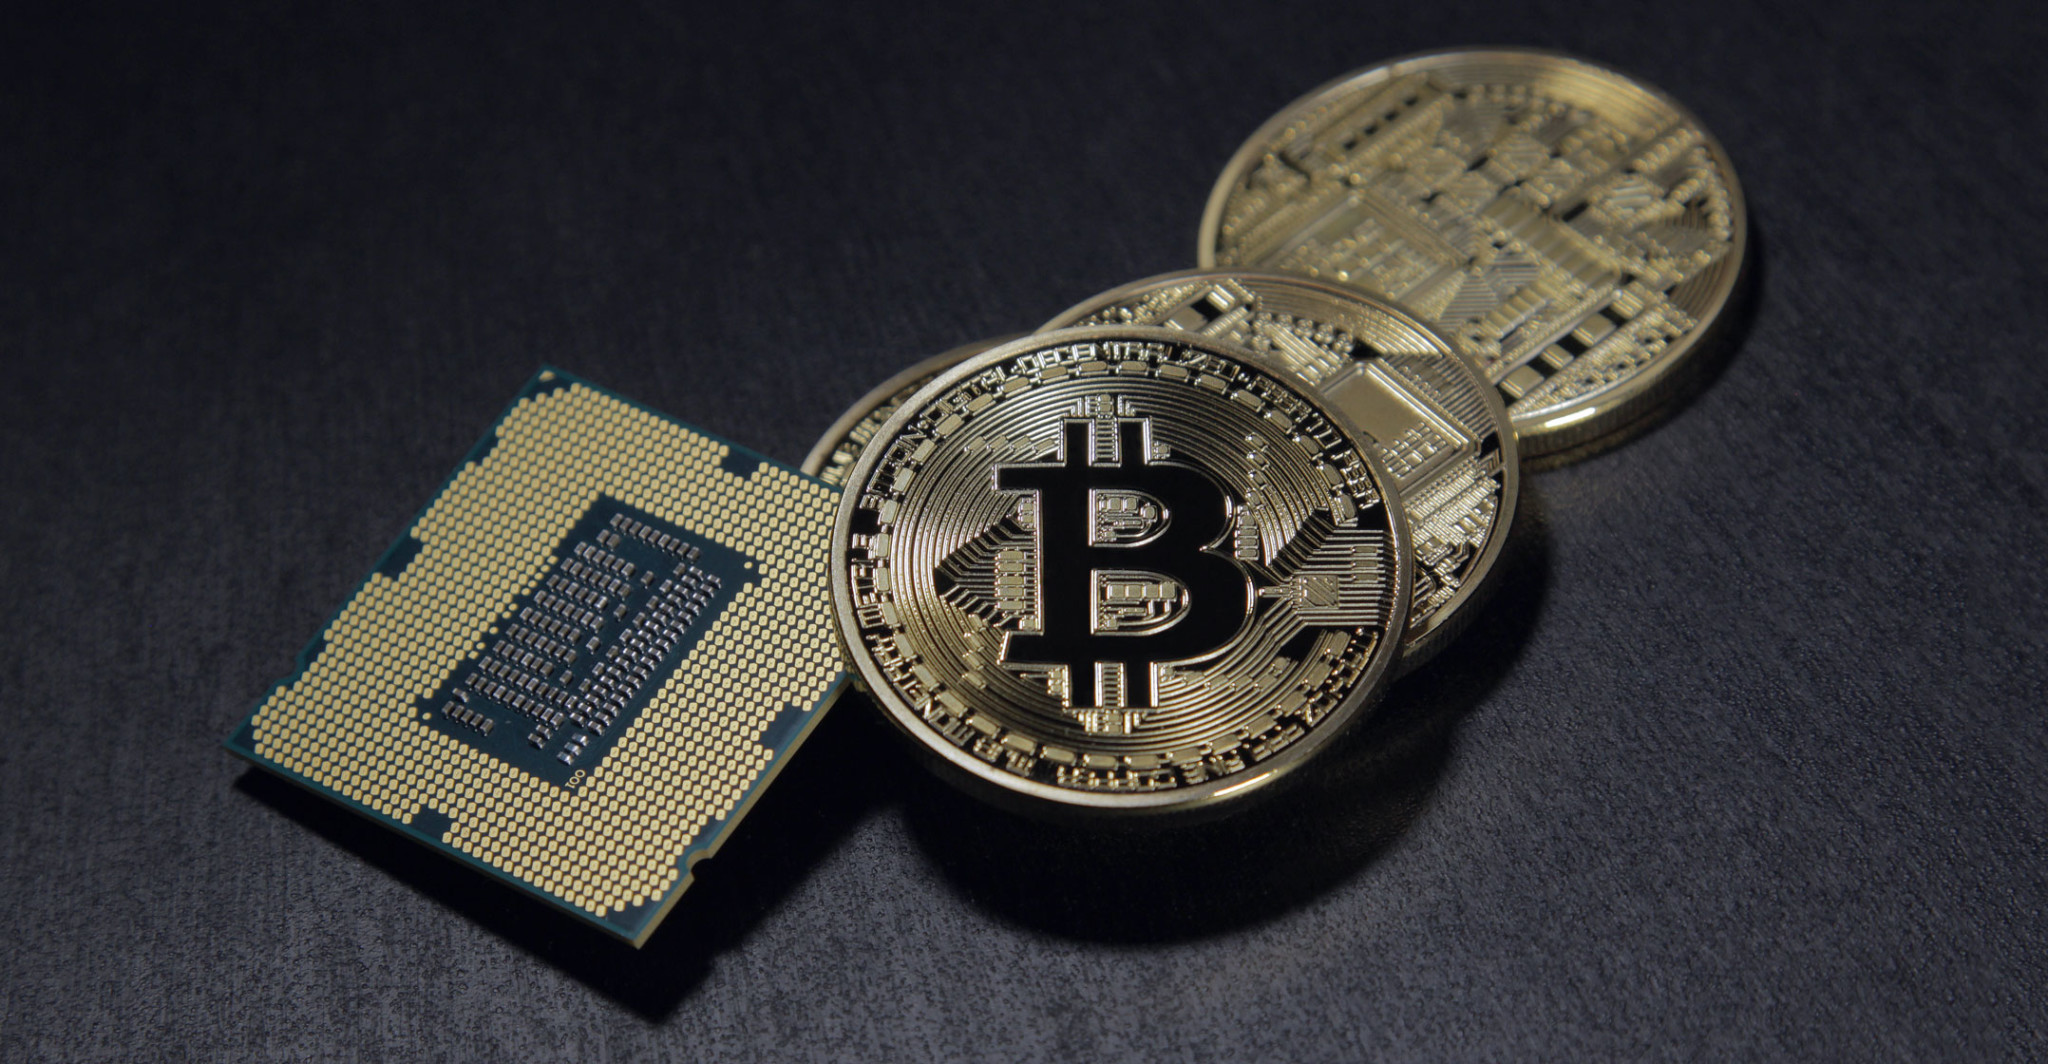 Bitcoin, ether lead cryptocurrency slide - TechCentral